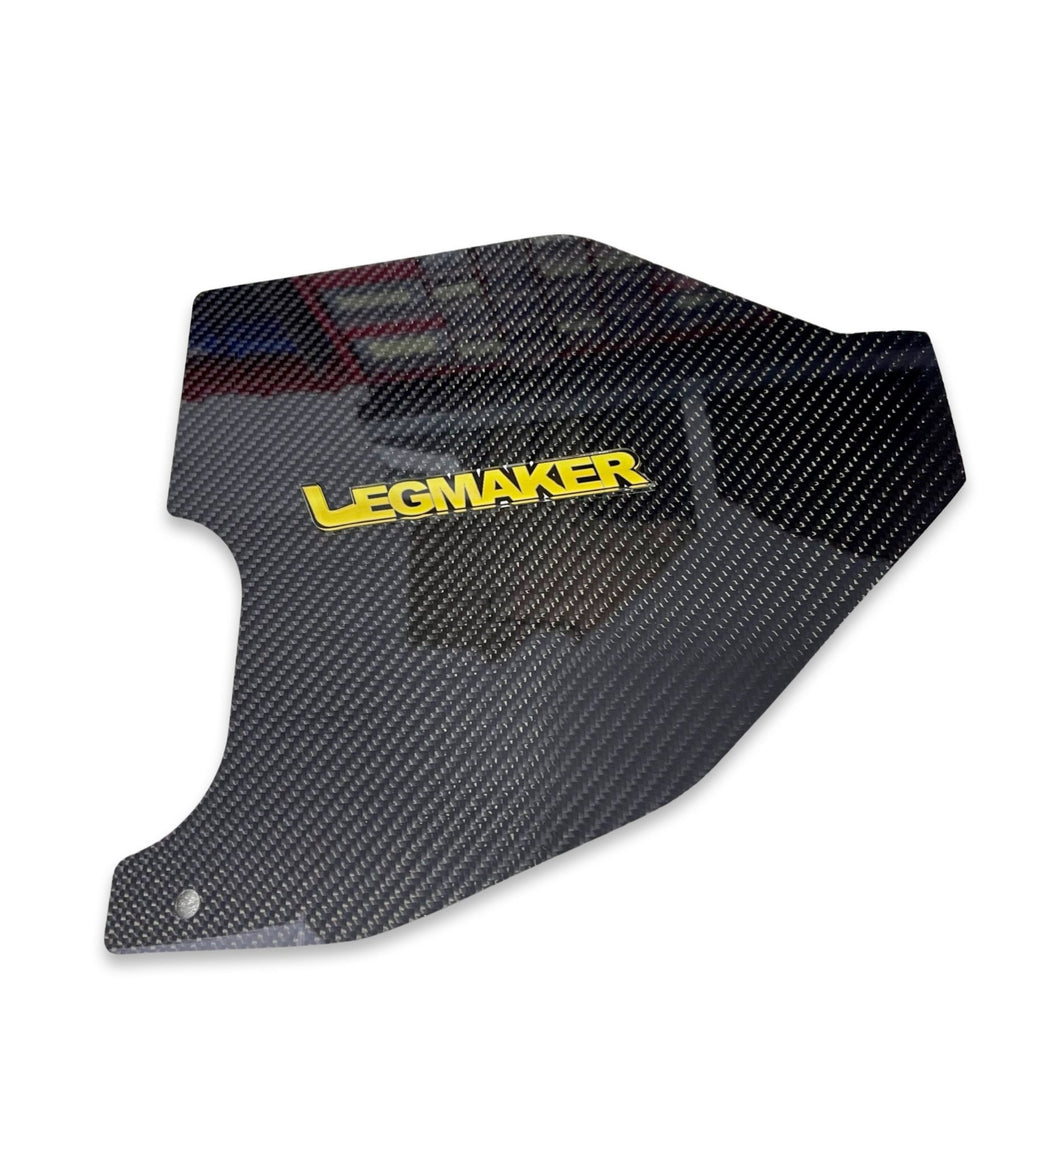 Carbon Fiber Cold Air Intake Covers for Legmaker / Corsa - American Stanced